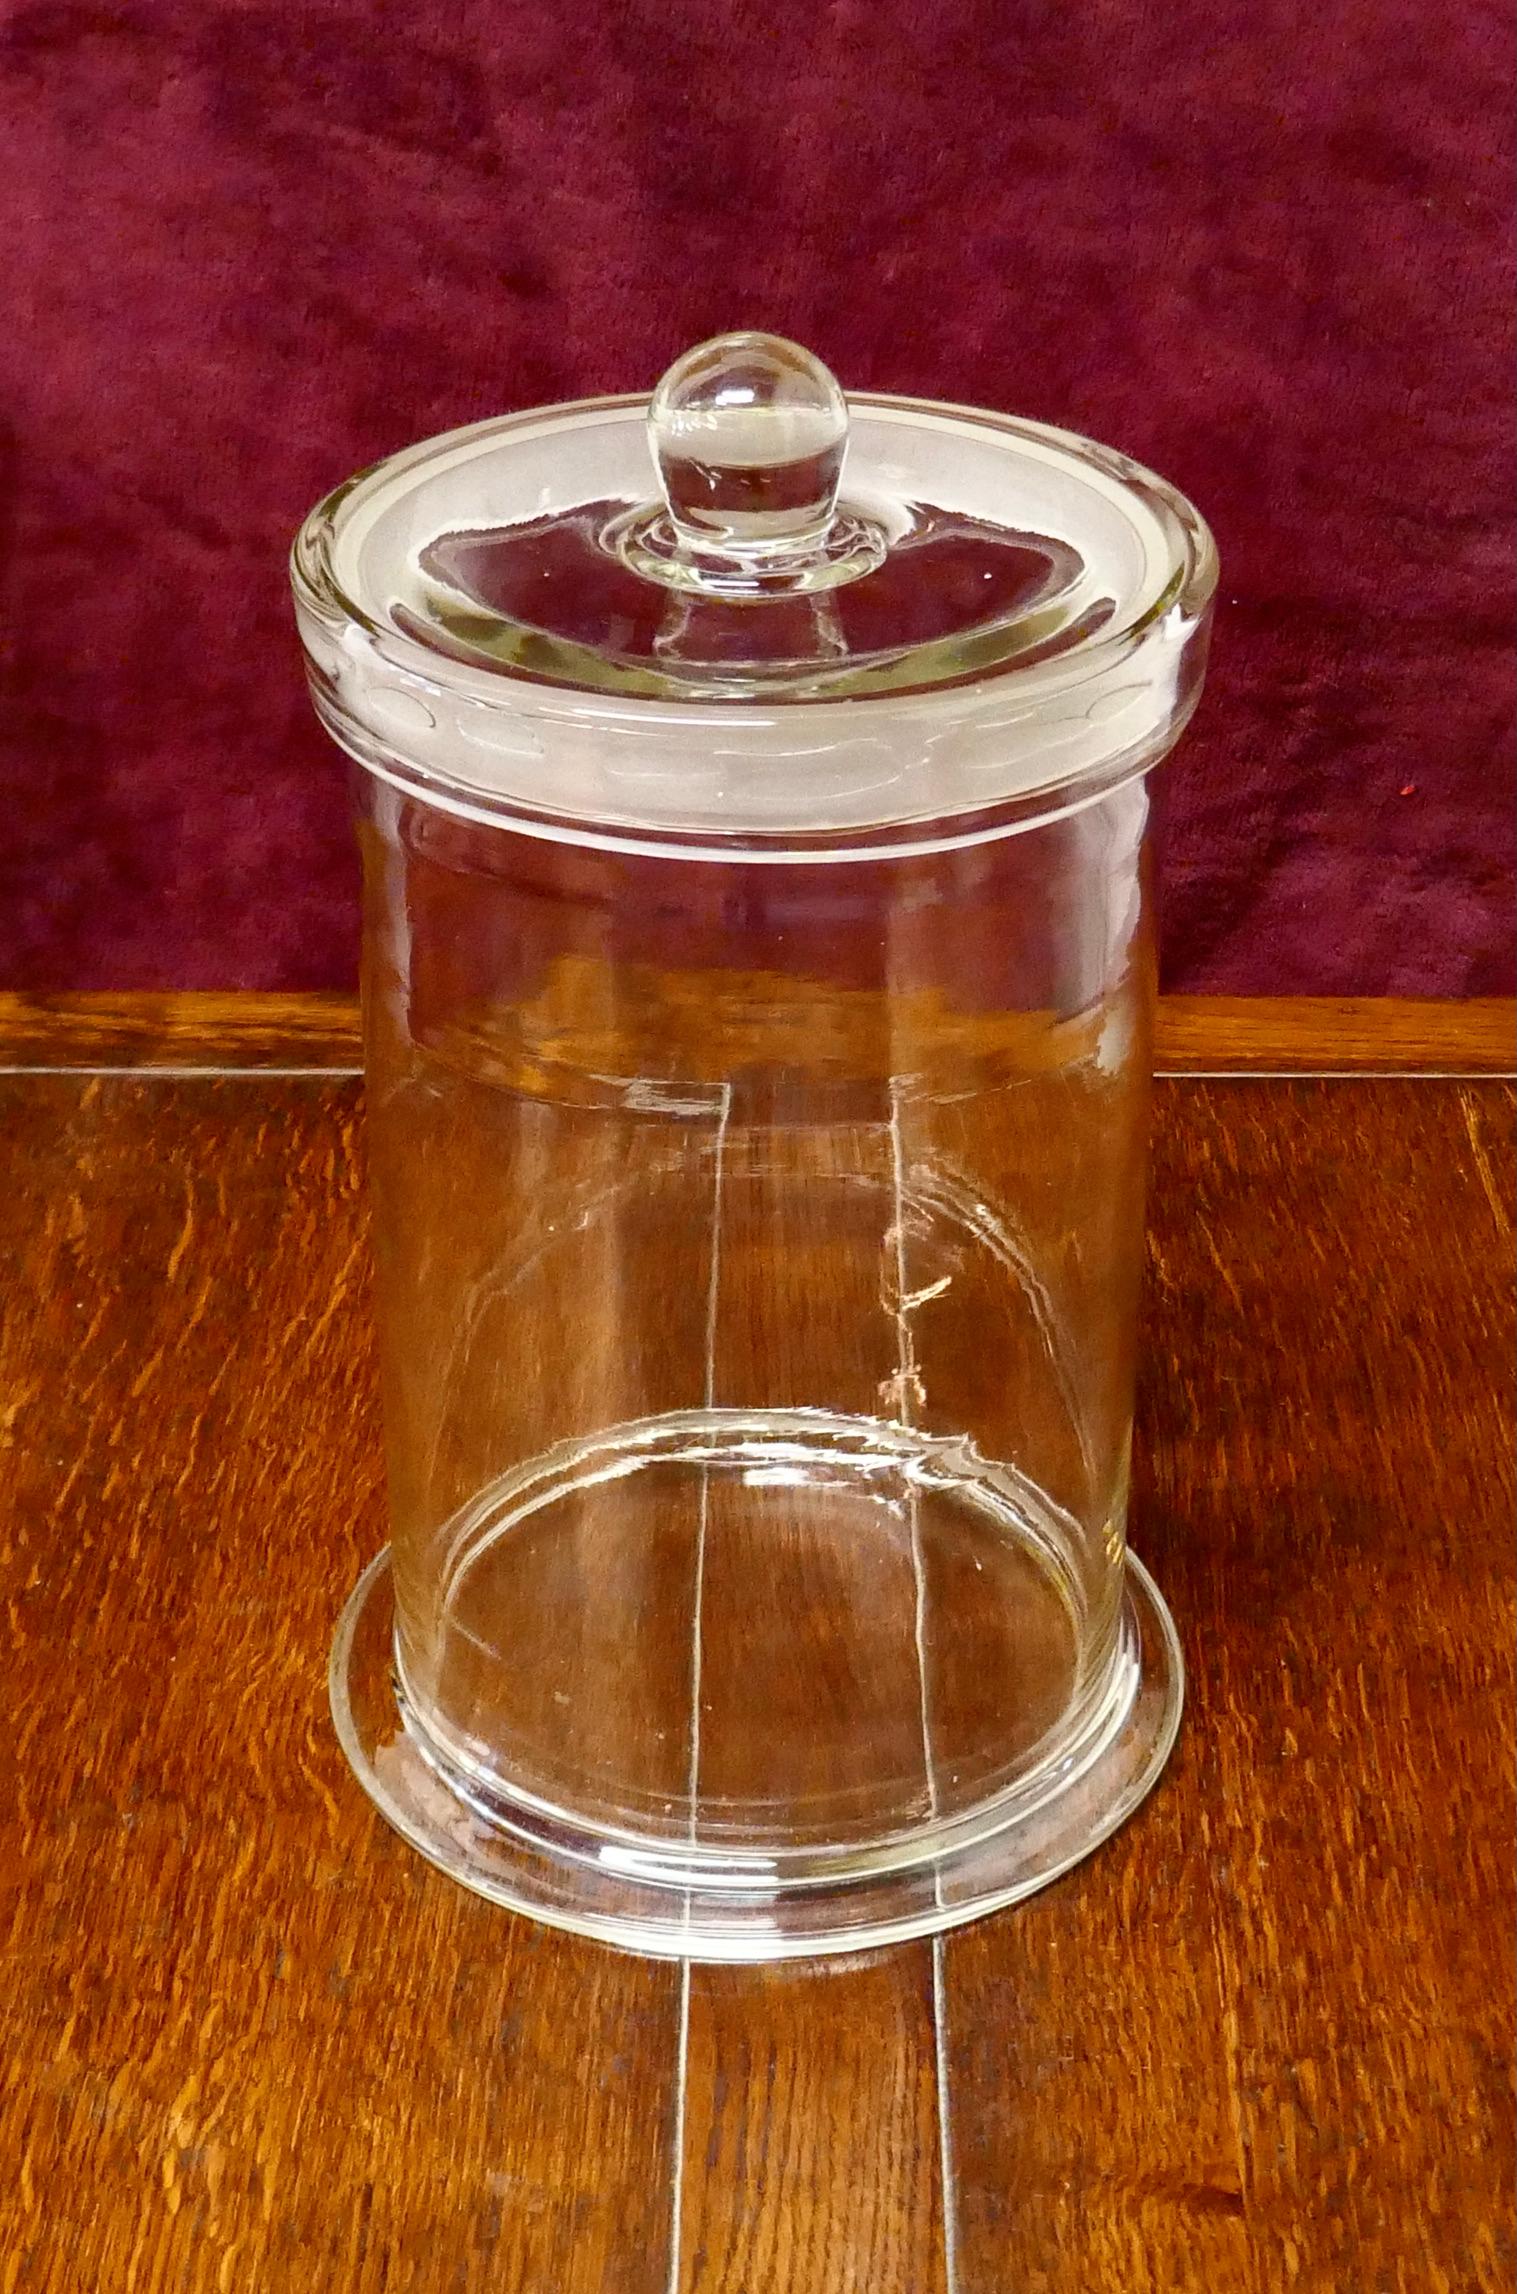 Large tall storage jar, shop display

This is a tall straight sided storage jar with a tight fitting lid, ideal for pasta but with many other uses

The jar is 14” tall and 9” in diameter
TNV122.